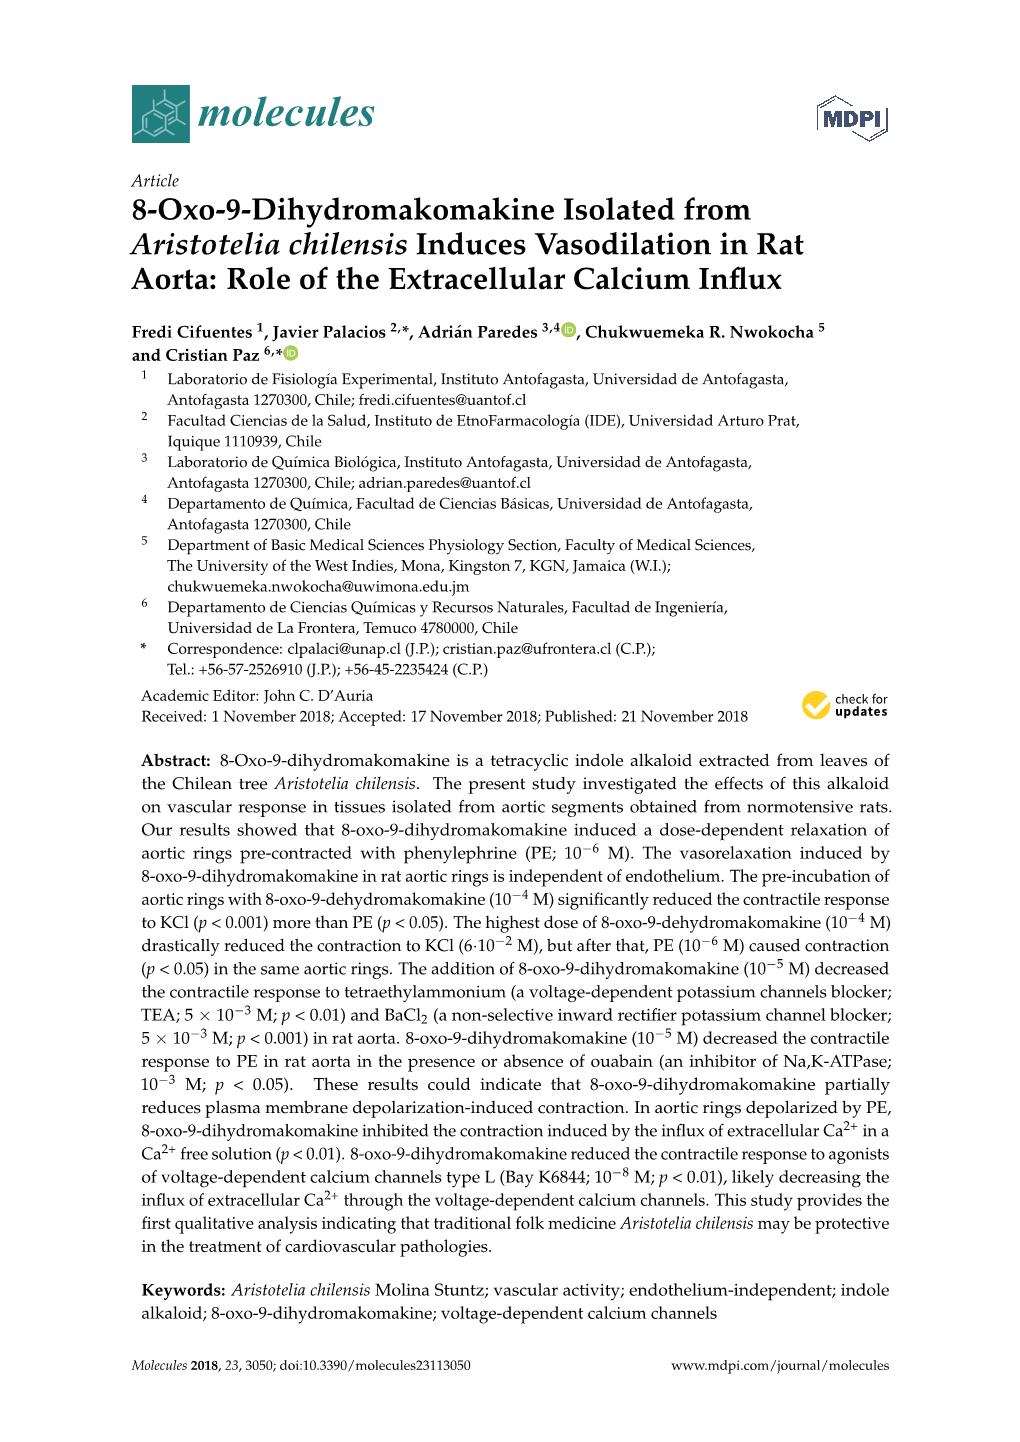 8-Oxo-9-Dihydromakomakine Isolated from Aristotelia Chilensis Induces Vasodilation in Rat Aorta: Role of the Extracellular Calcium Inﬂux